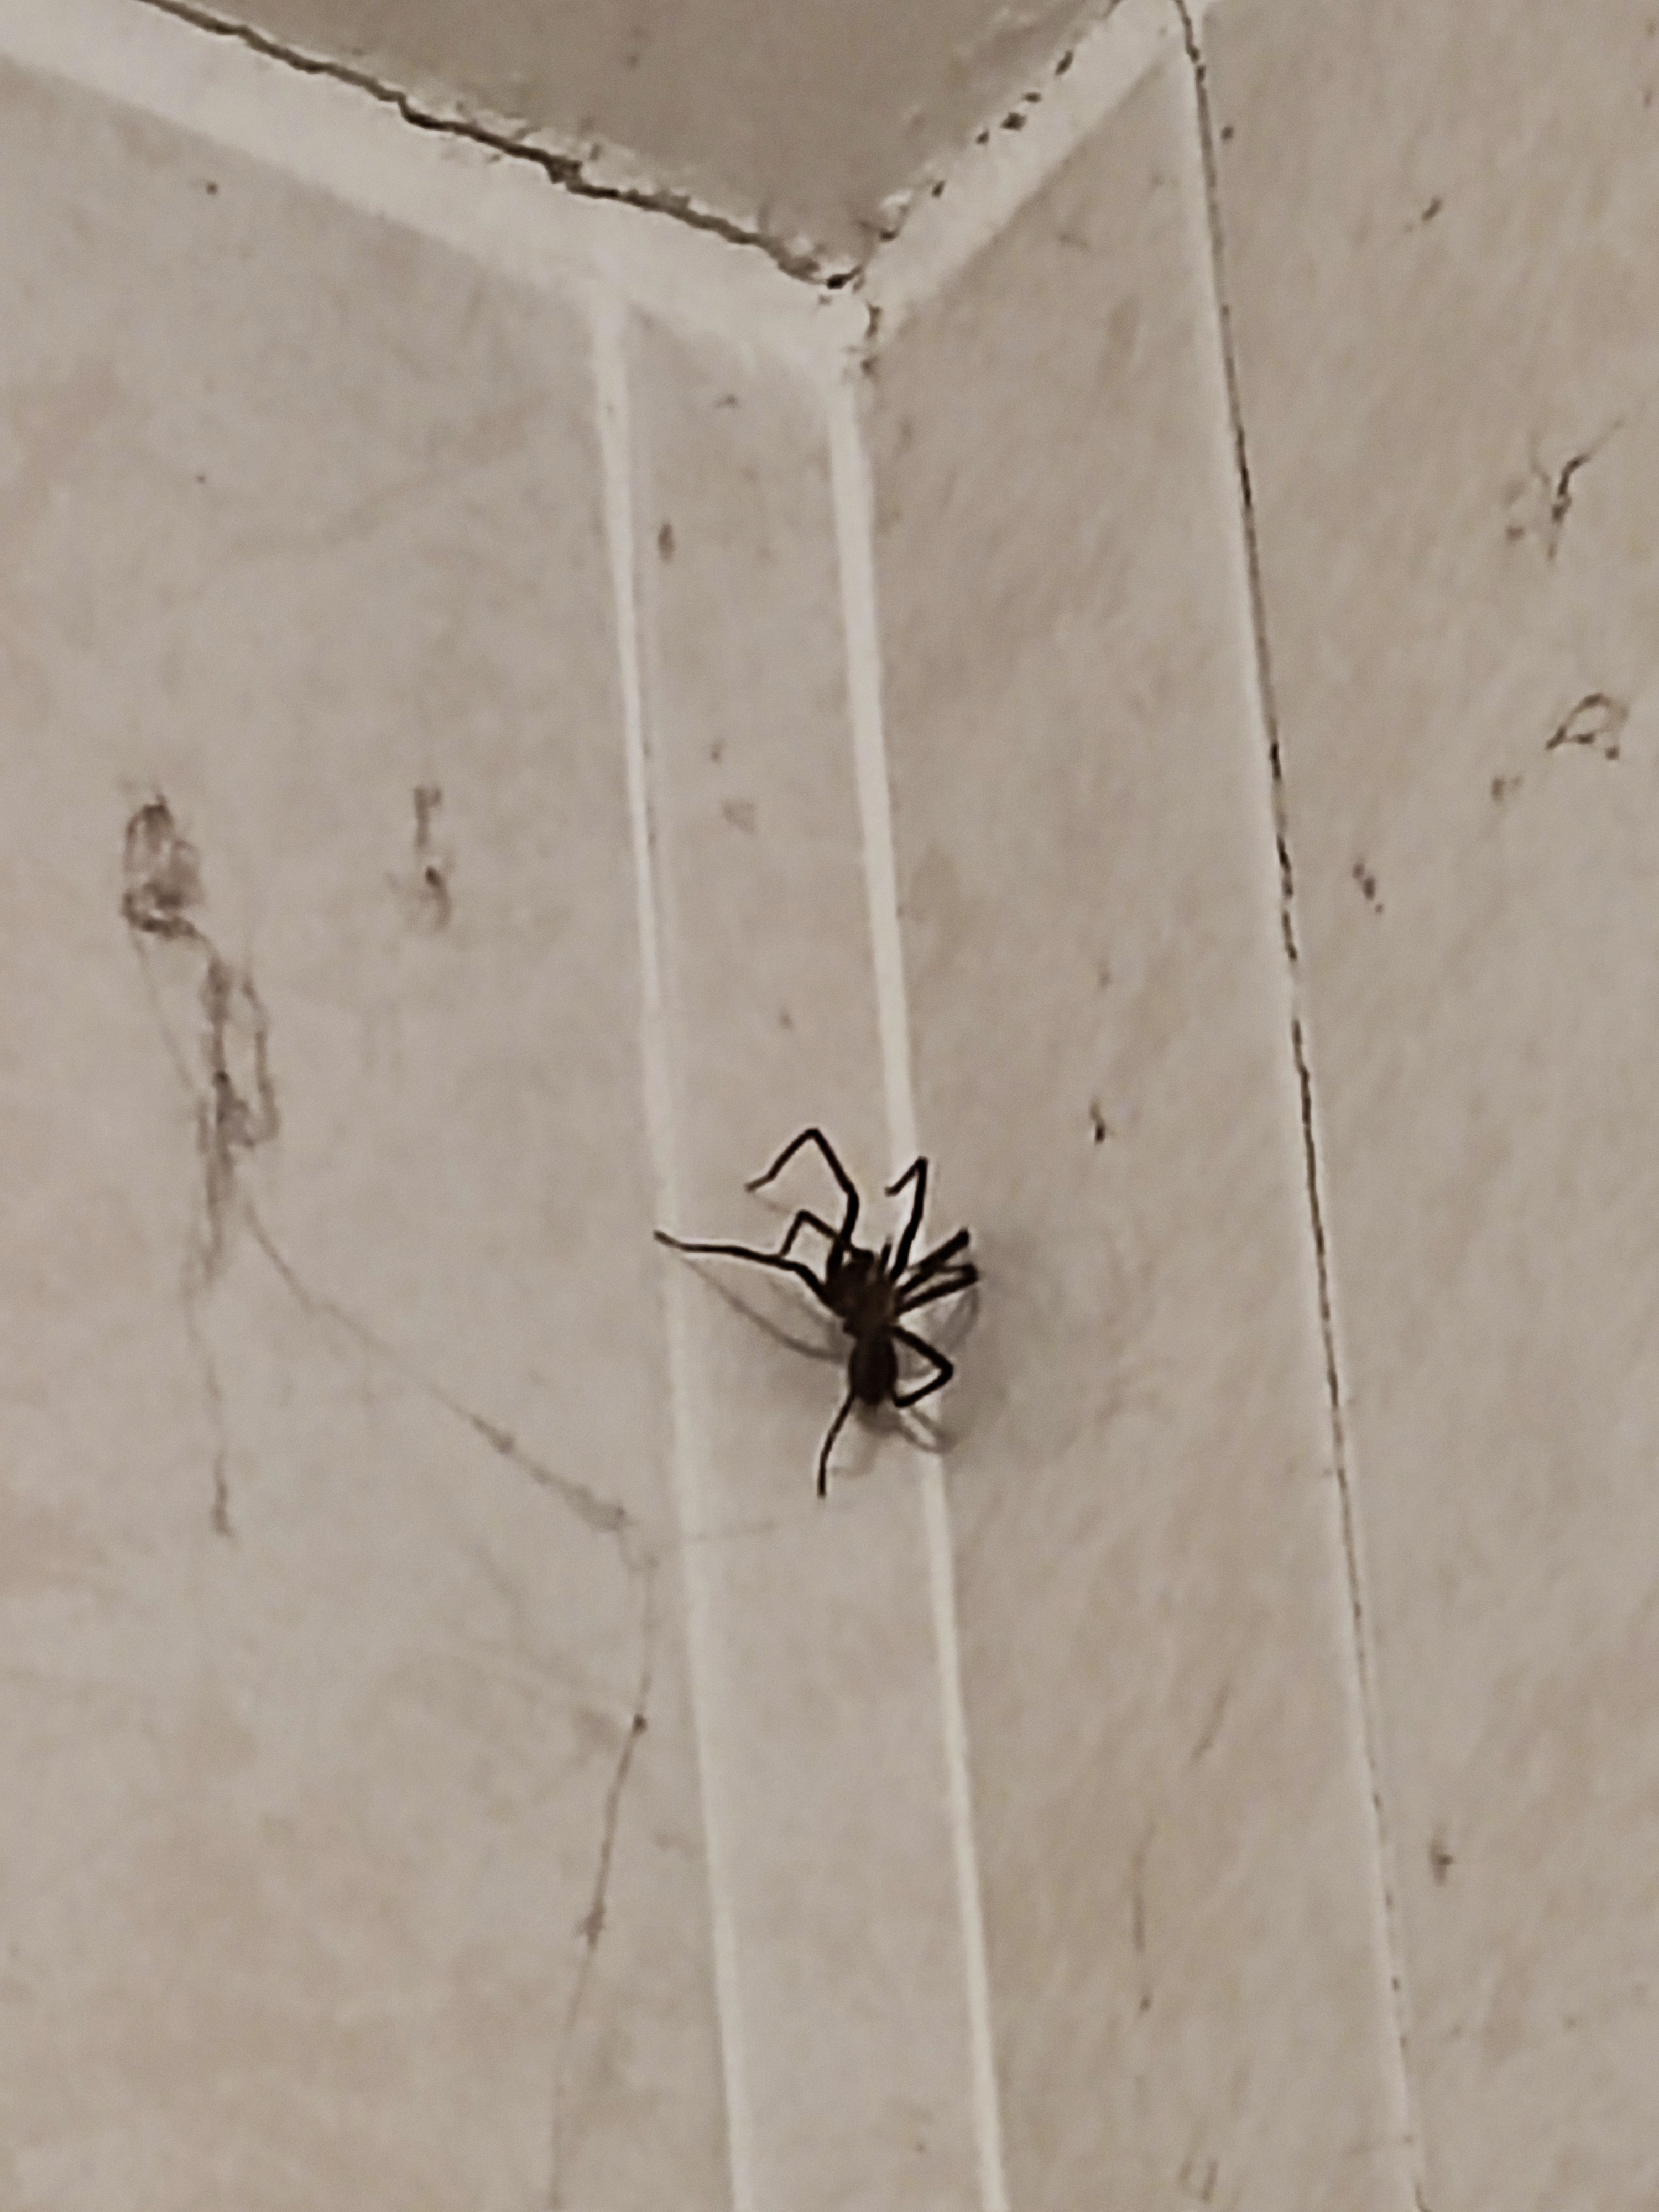 The giant giant house spider looking medium